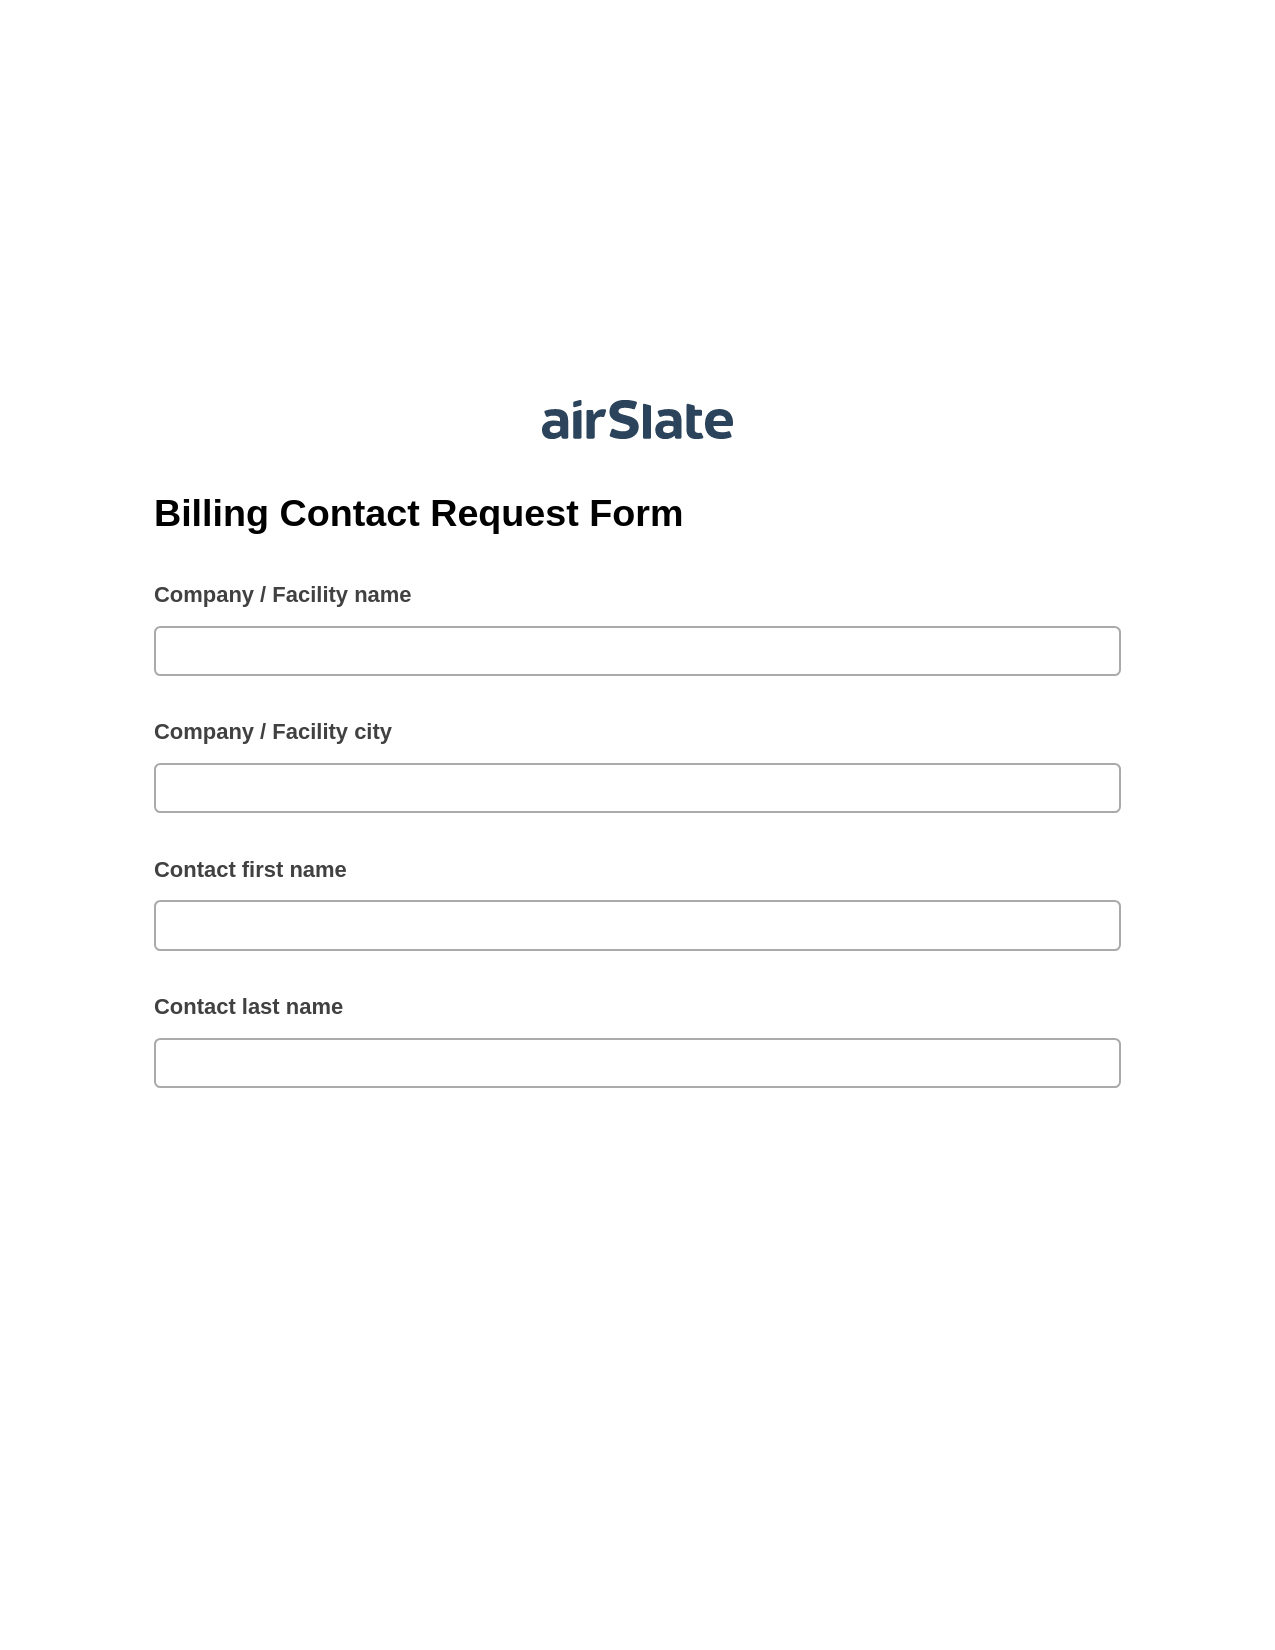 Multirole Billing Contact Request Form Pre-fill from another Slate Bot, Create slate addon, Export to Excel 365 Bot